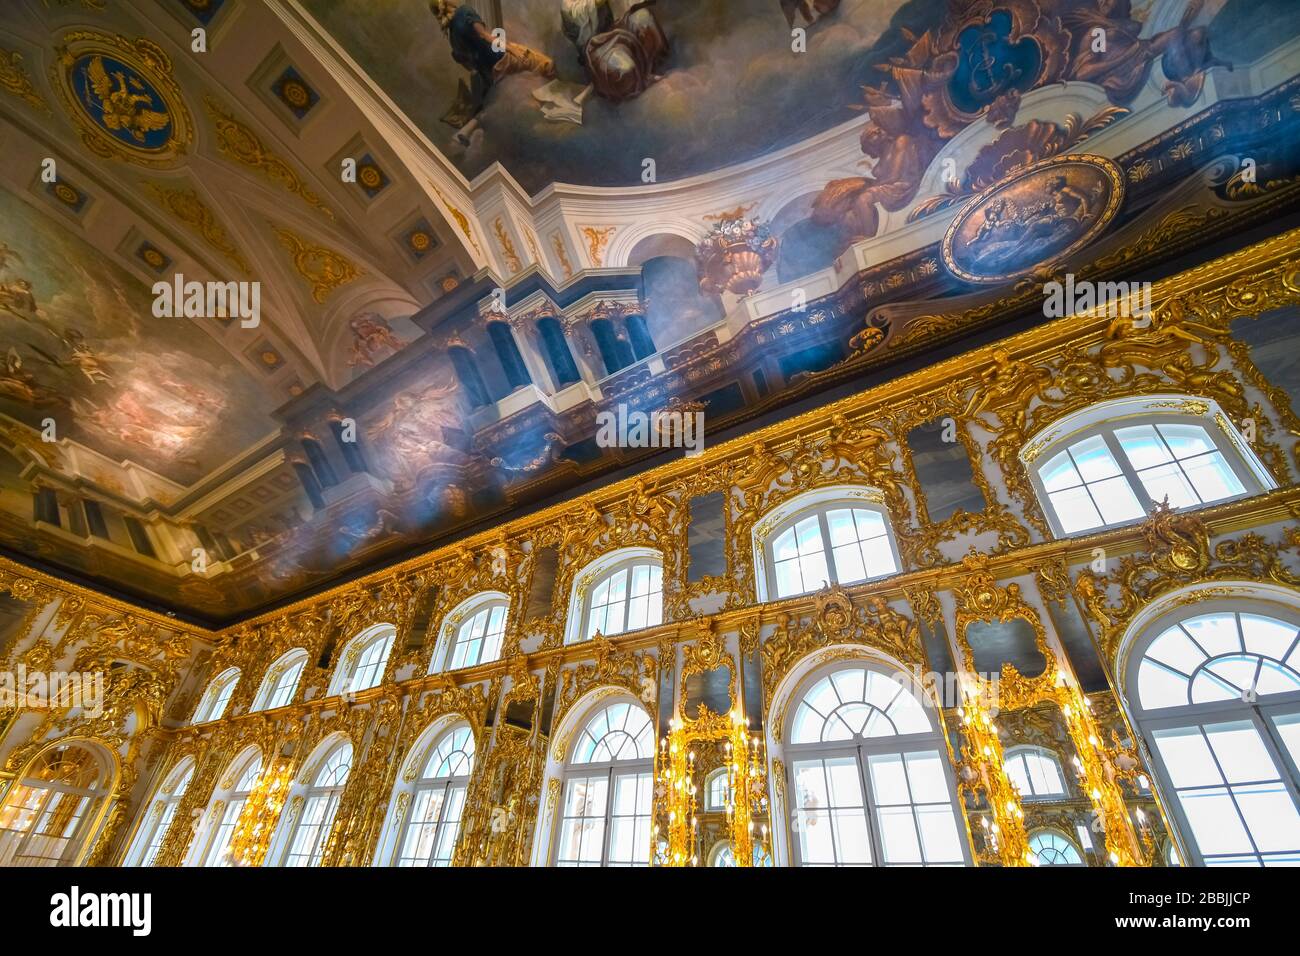 An ornate golden interior ballroom with a colorful painted ceiling inside the Rococo Catherine Palace ballroom at Pushkin near St. Petersburg, Russia. Stock Photo